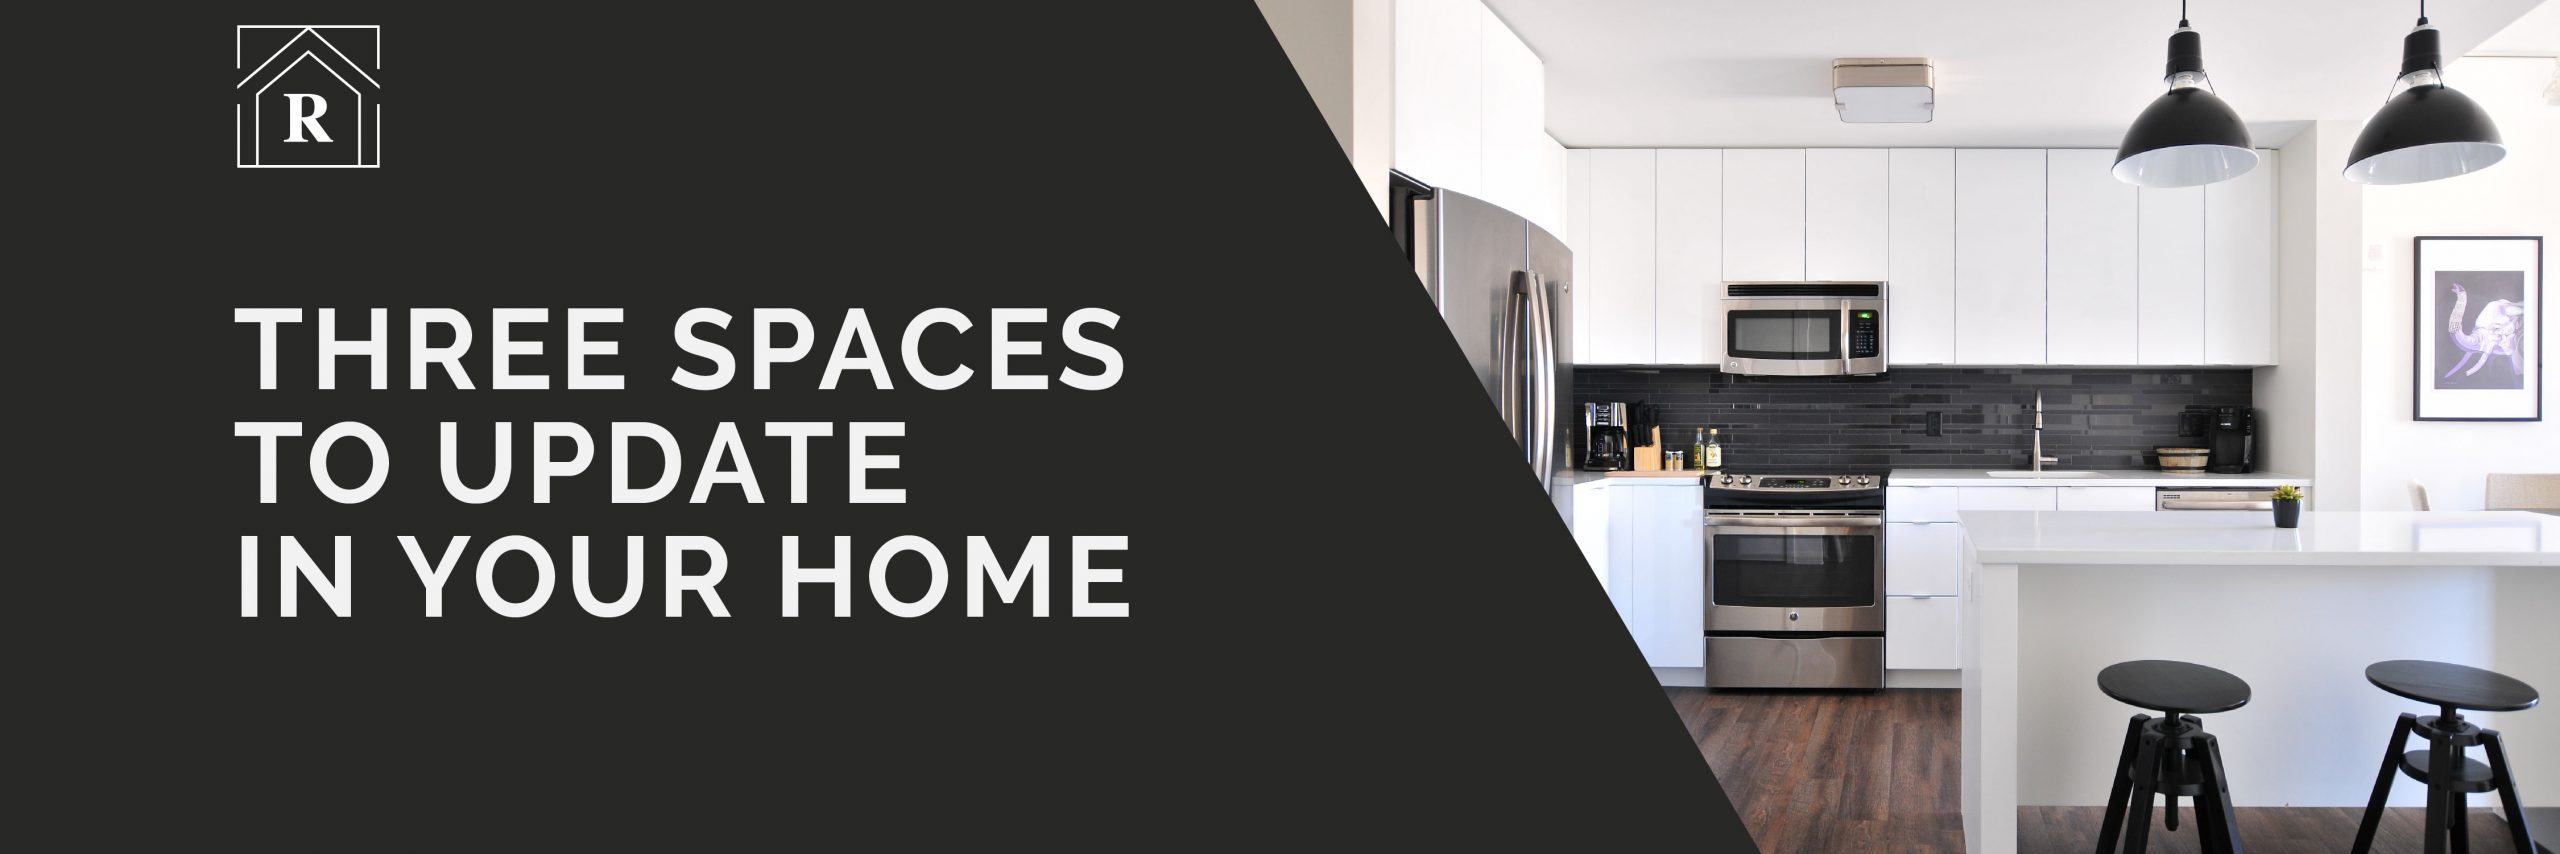 Three Spaces to Update in Your Home Blog Post